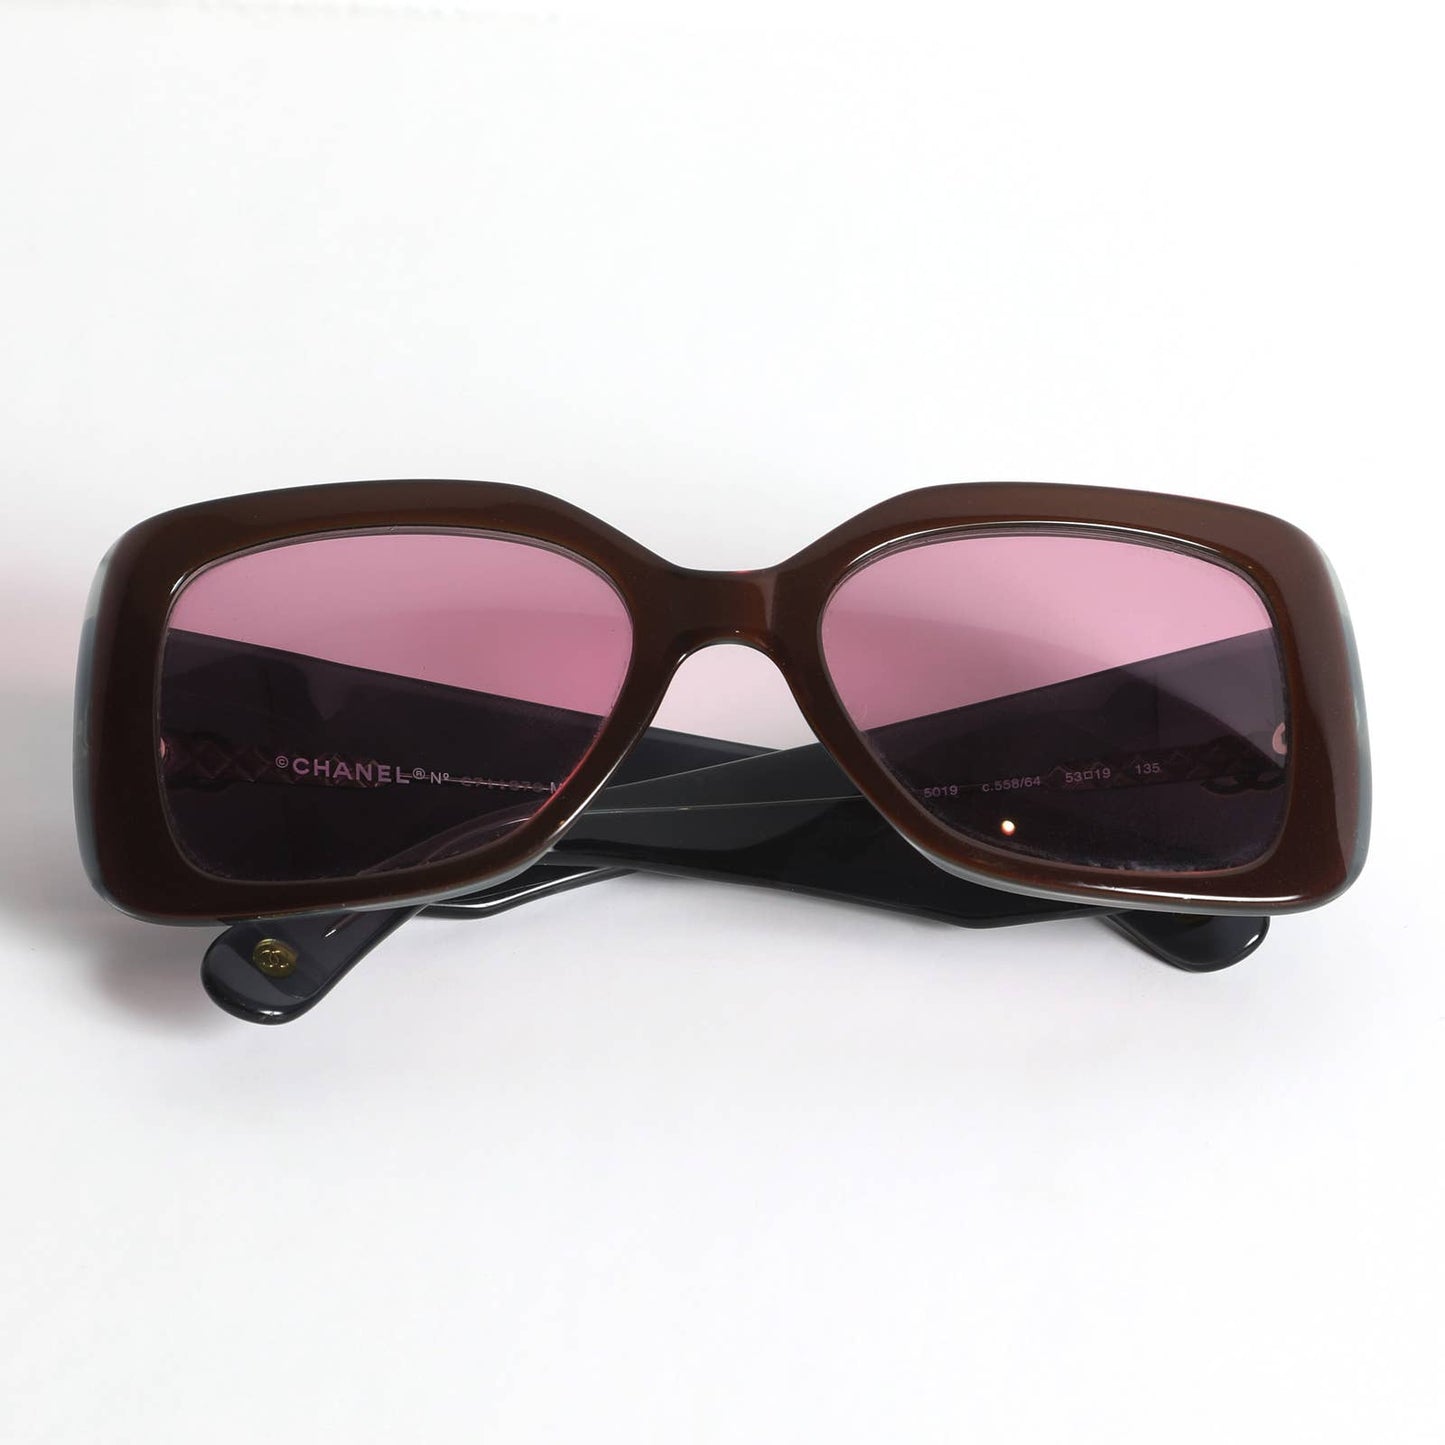 CHANEL Women's Sunglasses 5019 Quilted Pink Black Frames CC Logo